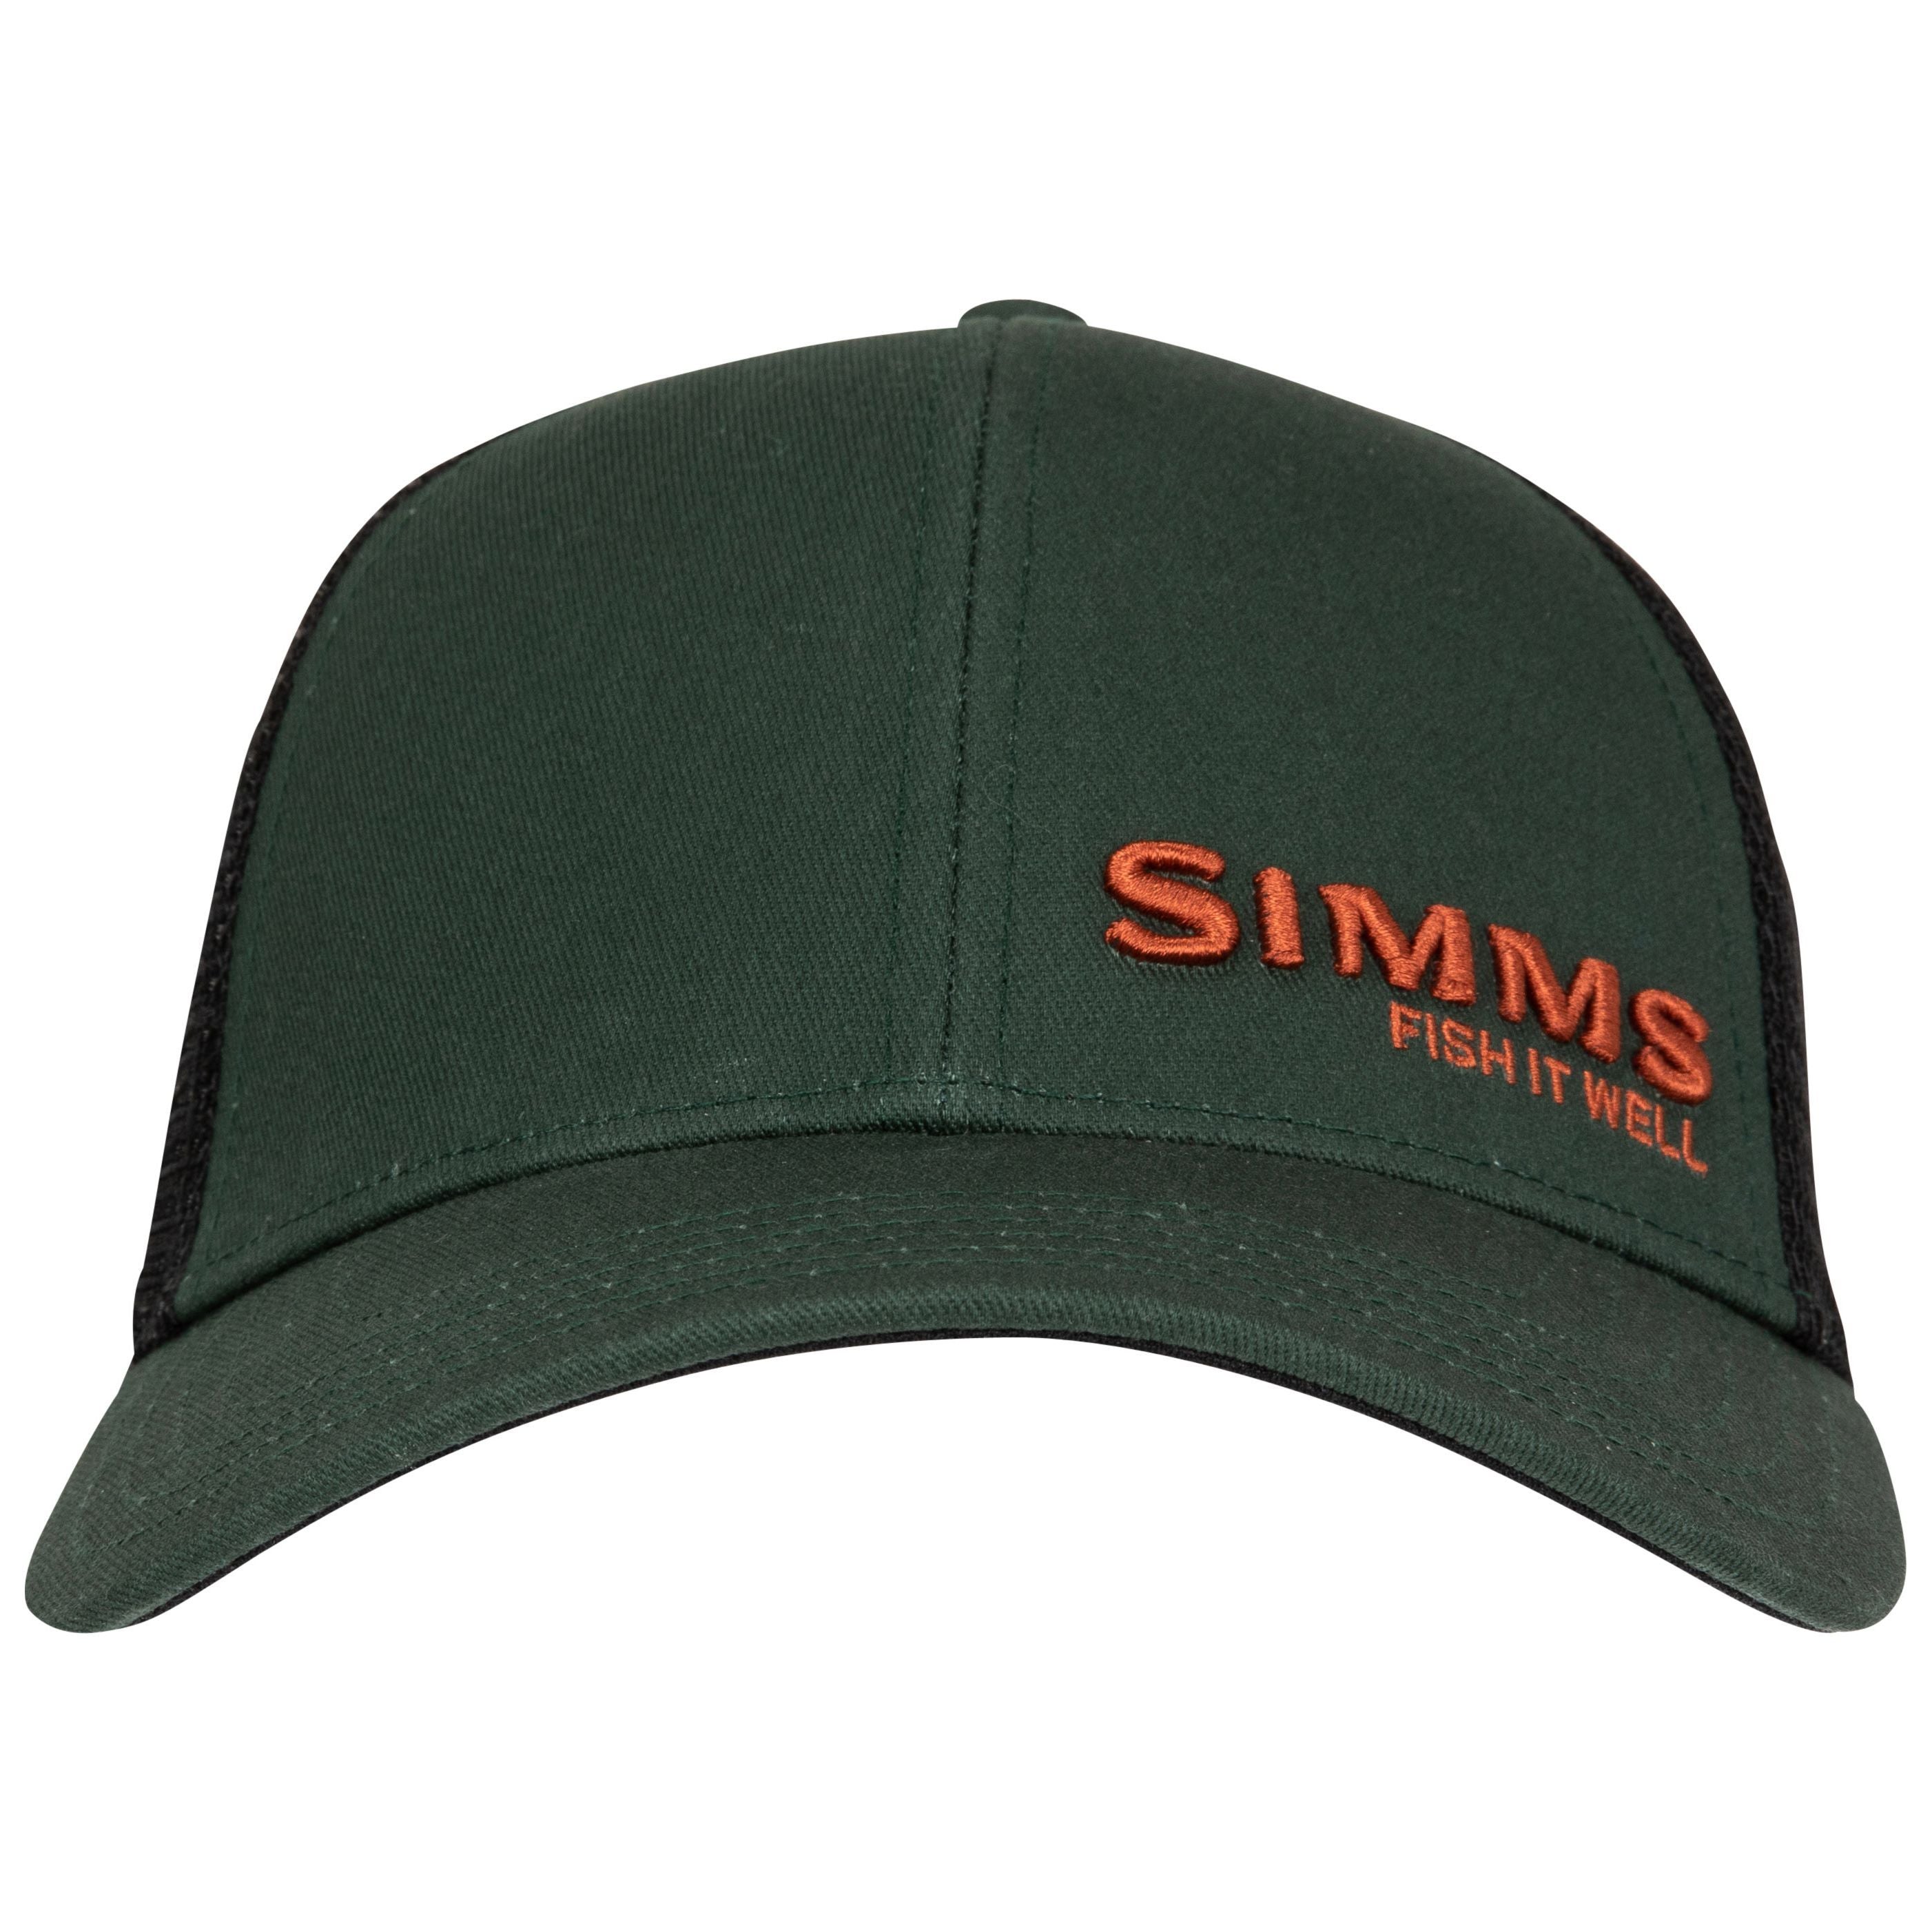 Simms Fish It Well Forever Trucker Foliage Image 02